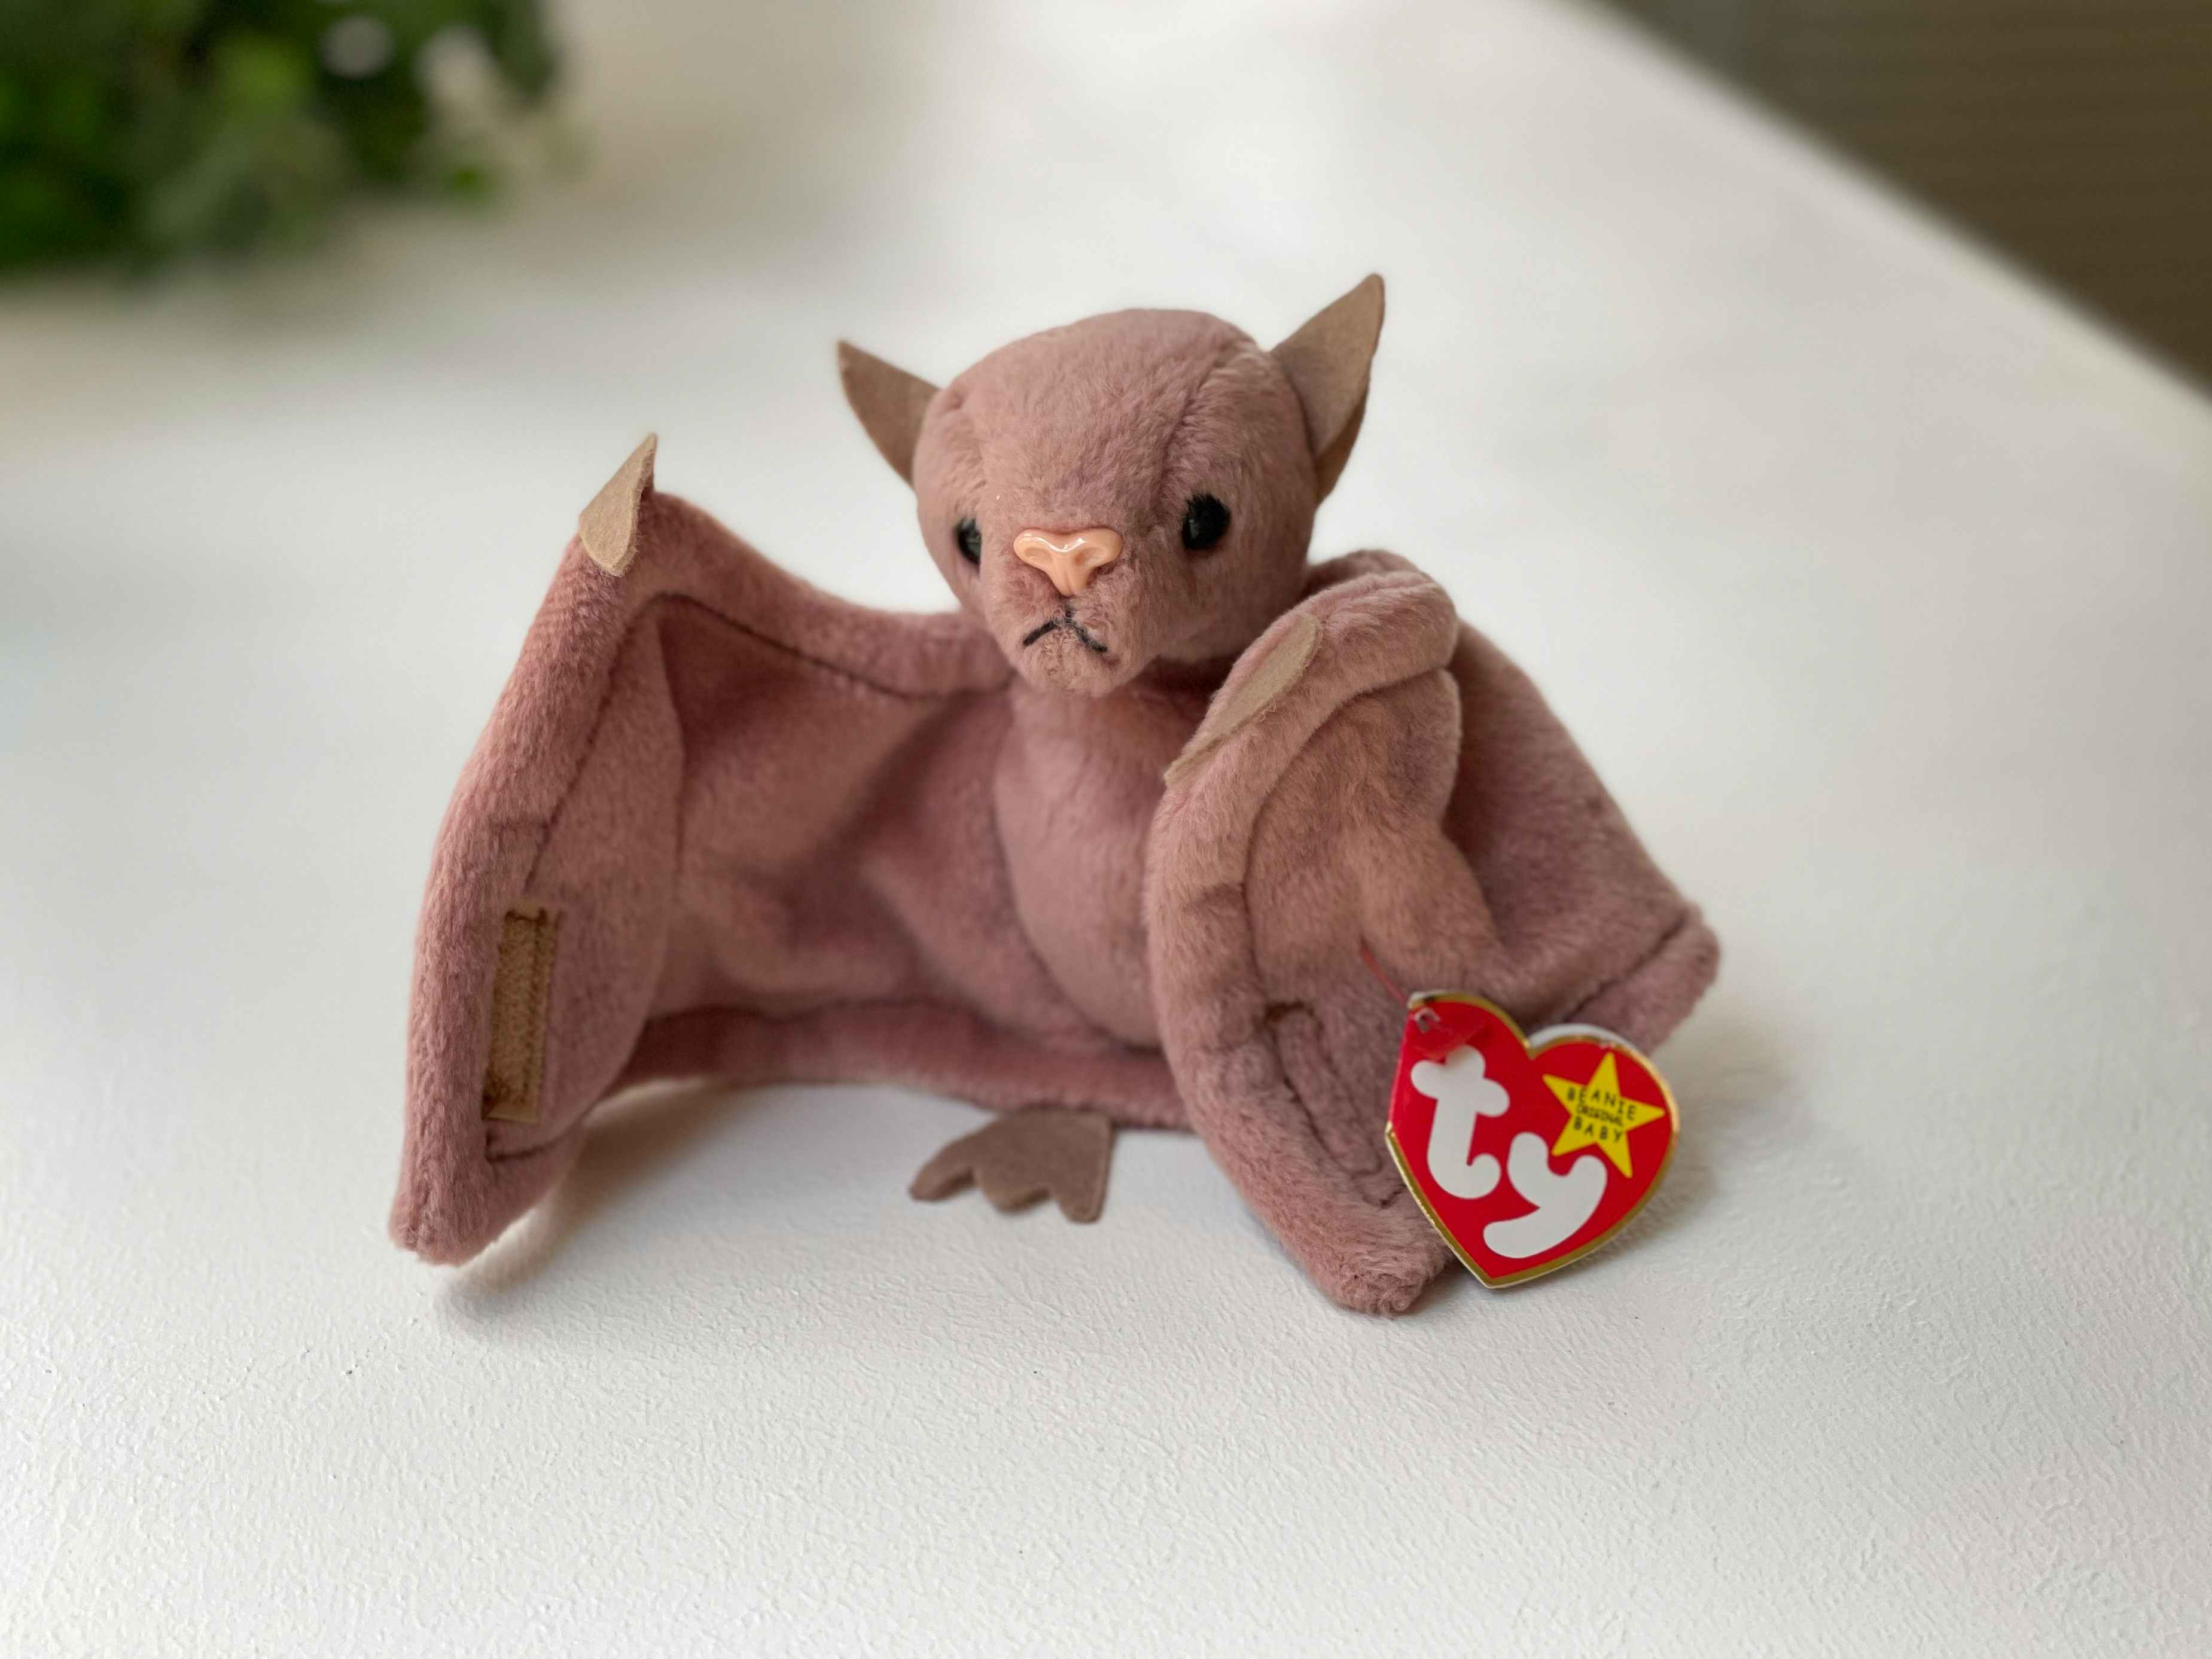 A Batty the Bat beanie baby sitting on a white table.